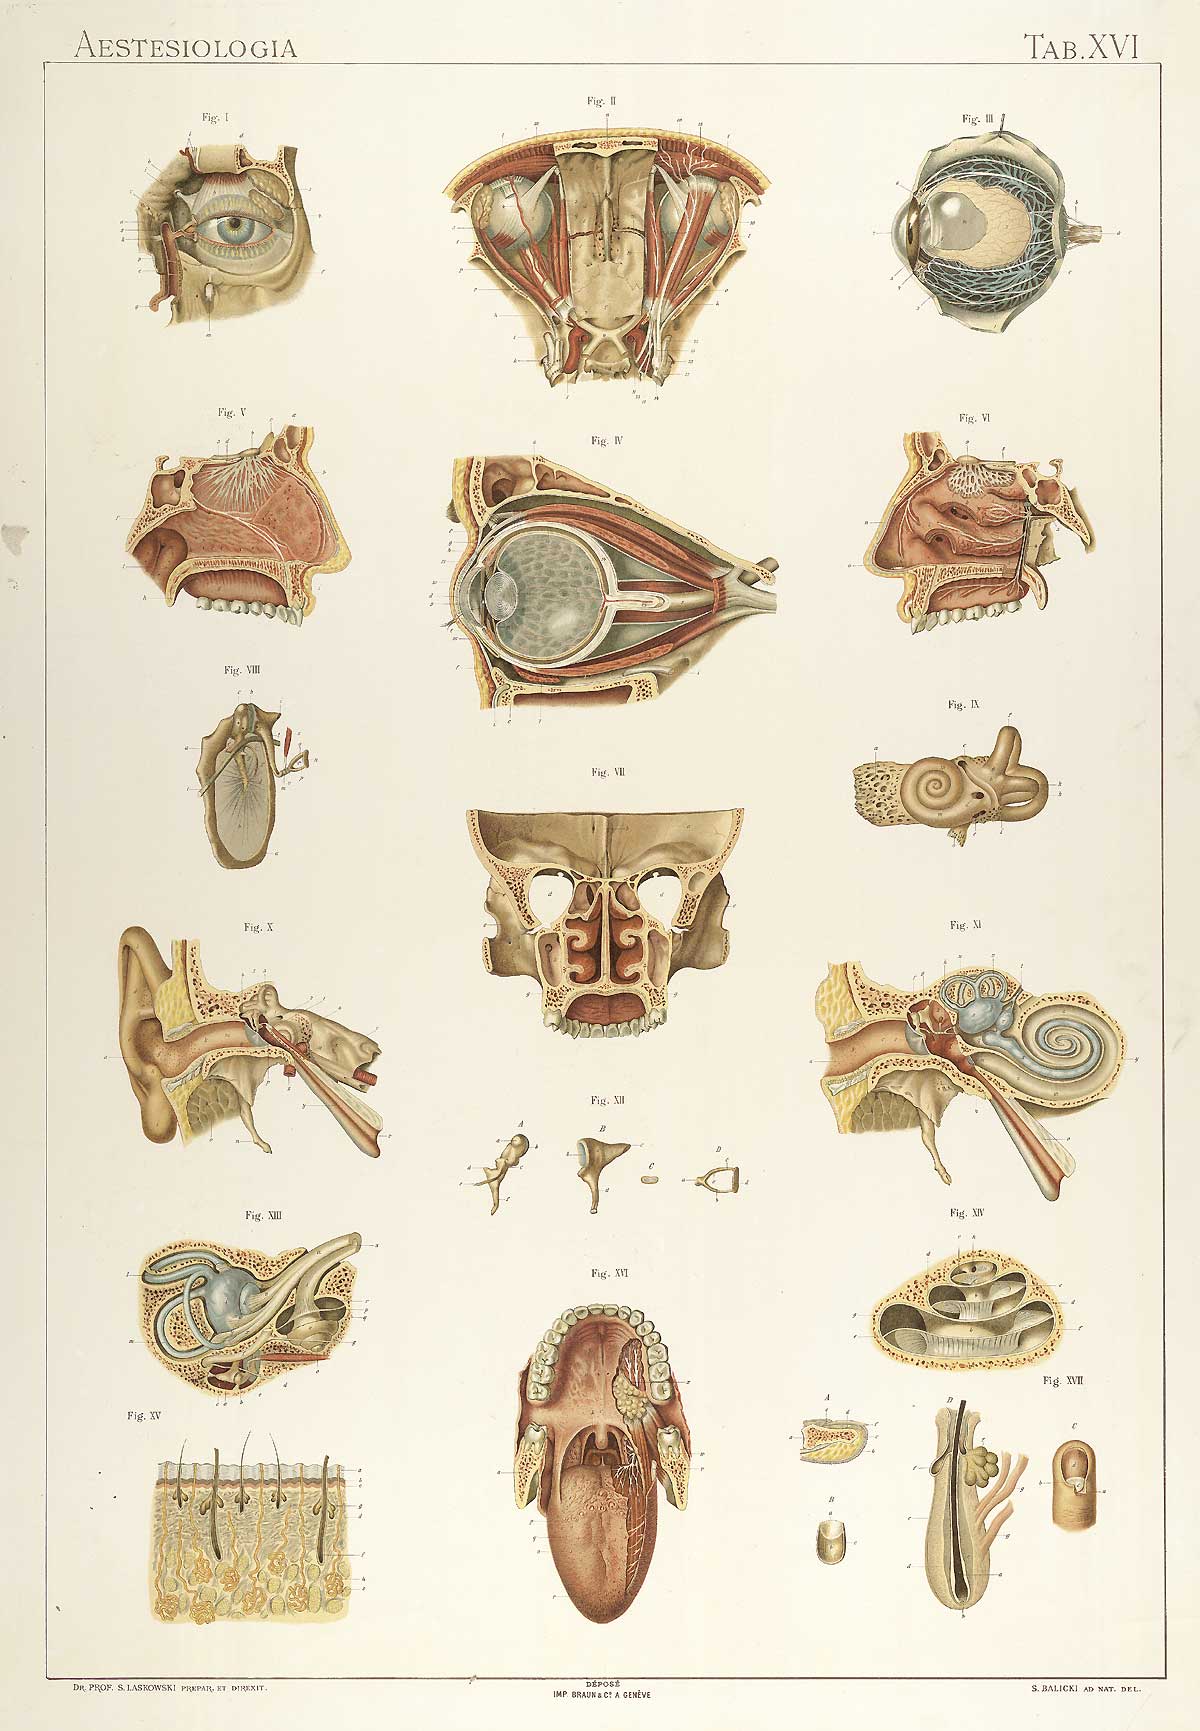 Plate 16 of Sigismond Laskowski's Anatomie normale du corps humain, featuring images of the nerves, organs and bones of the skull.